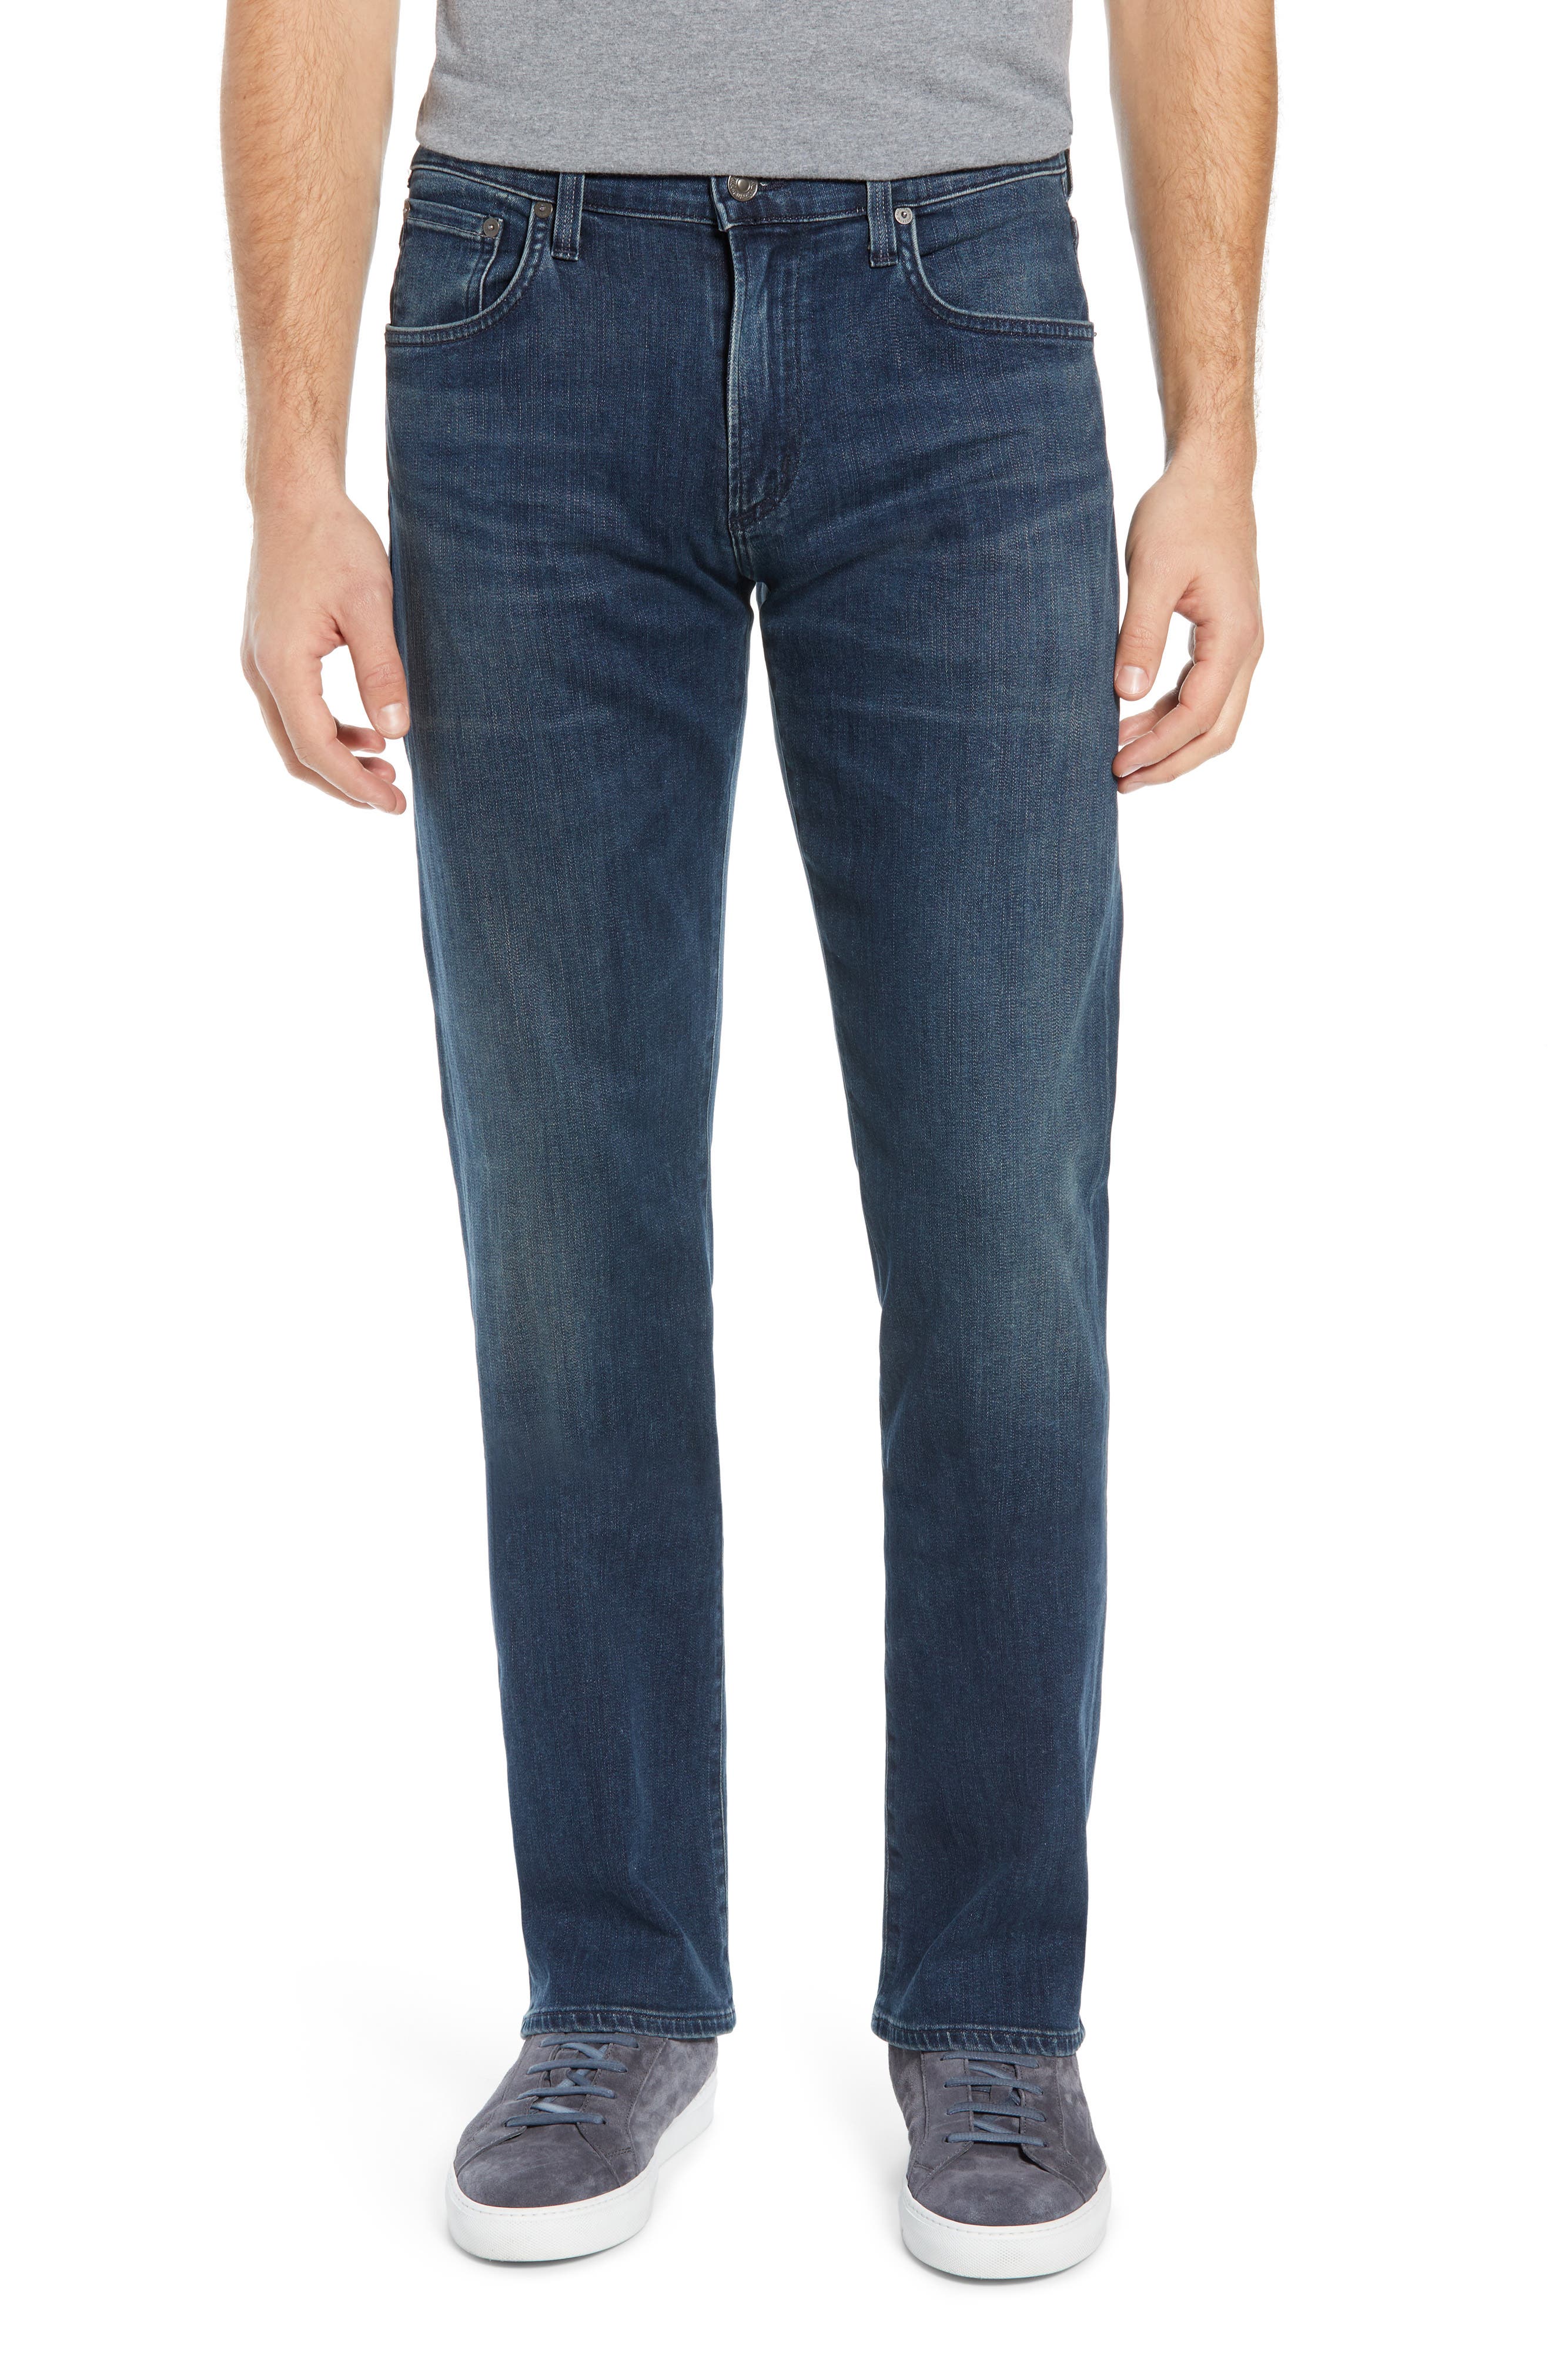 citizens of humanity jeans price